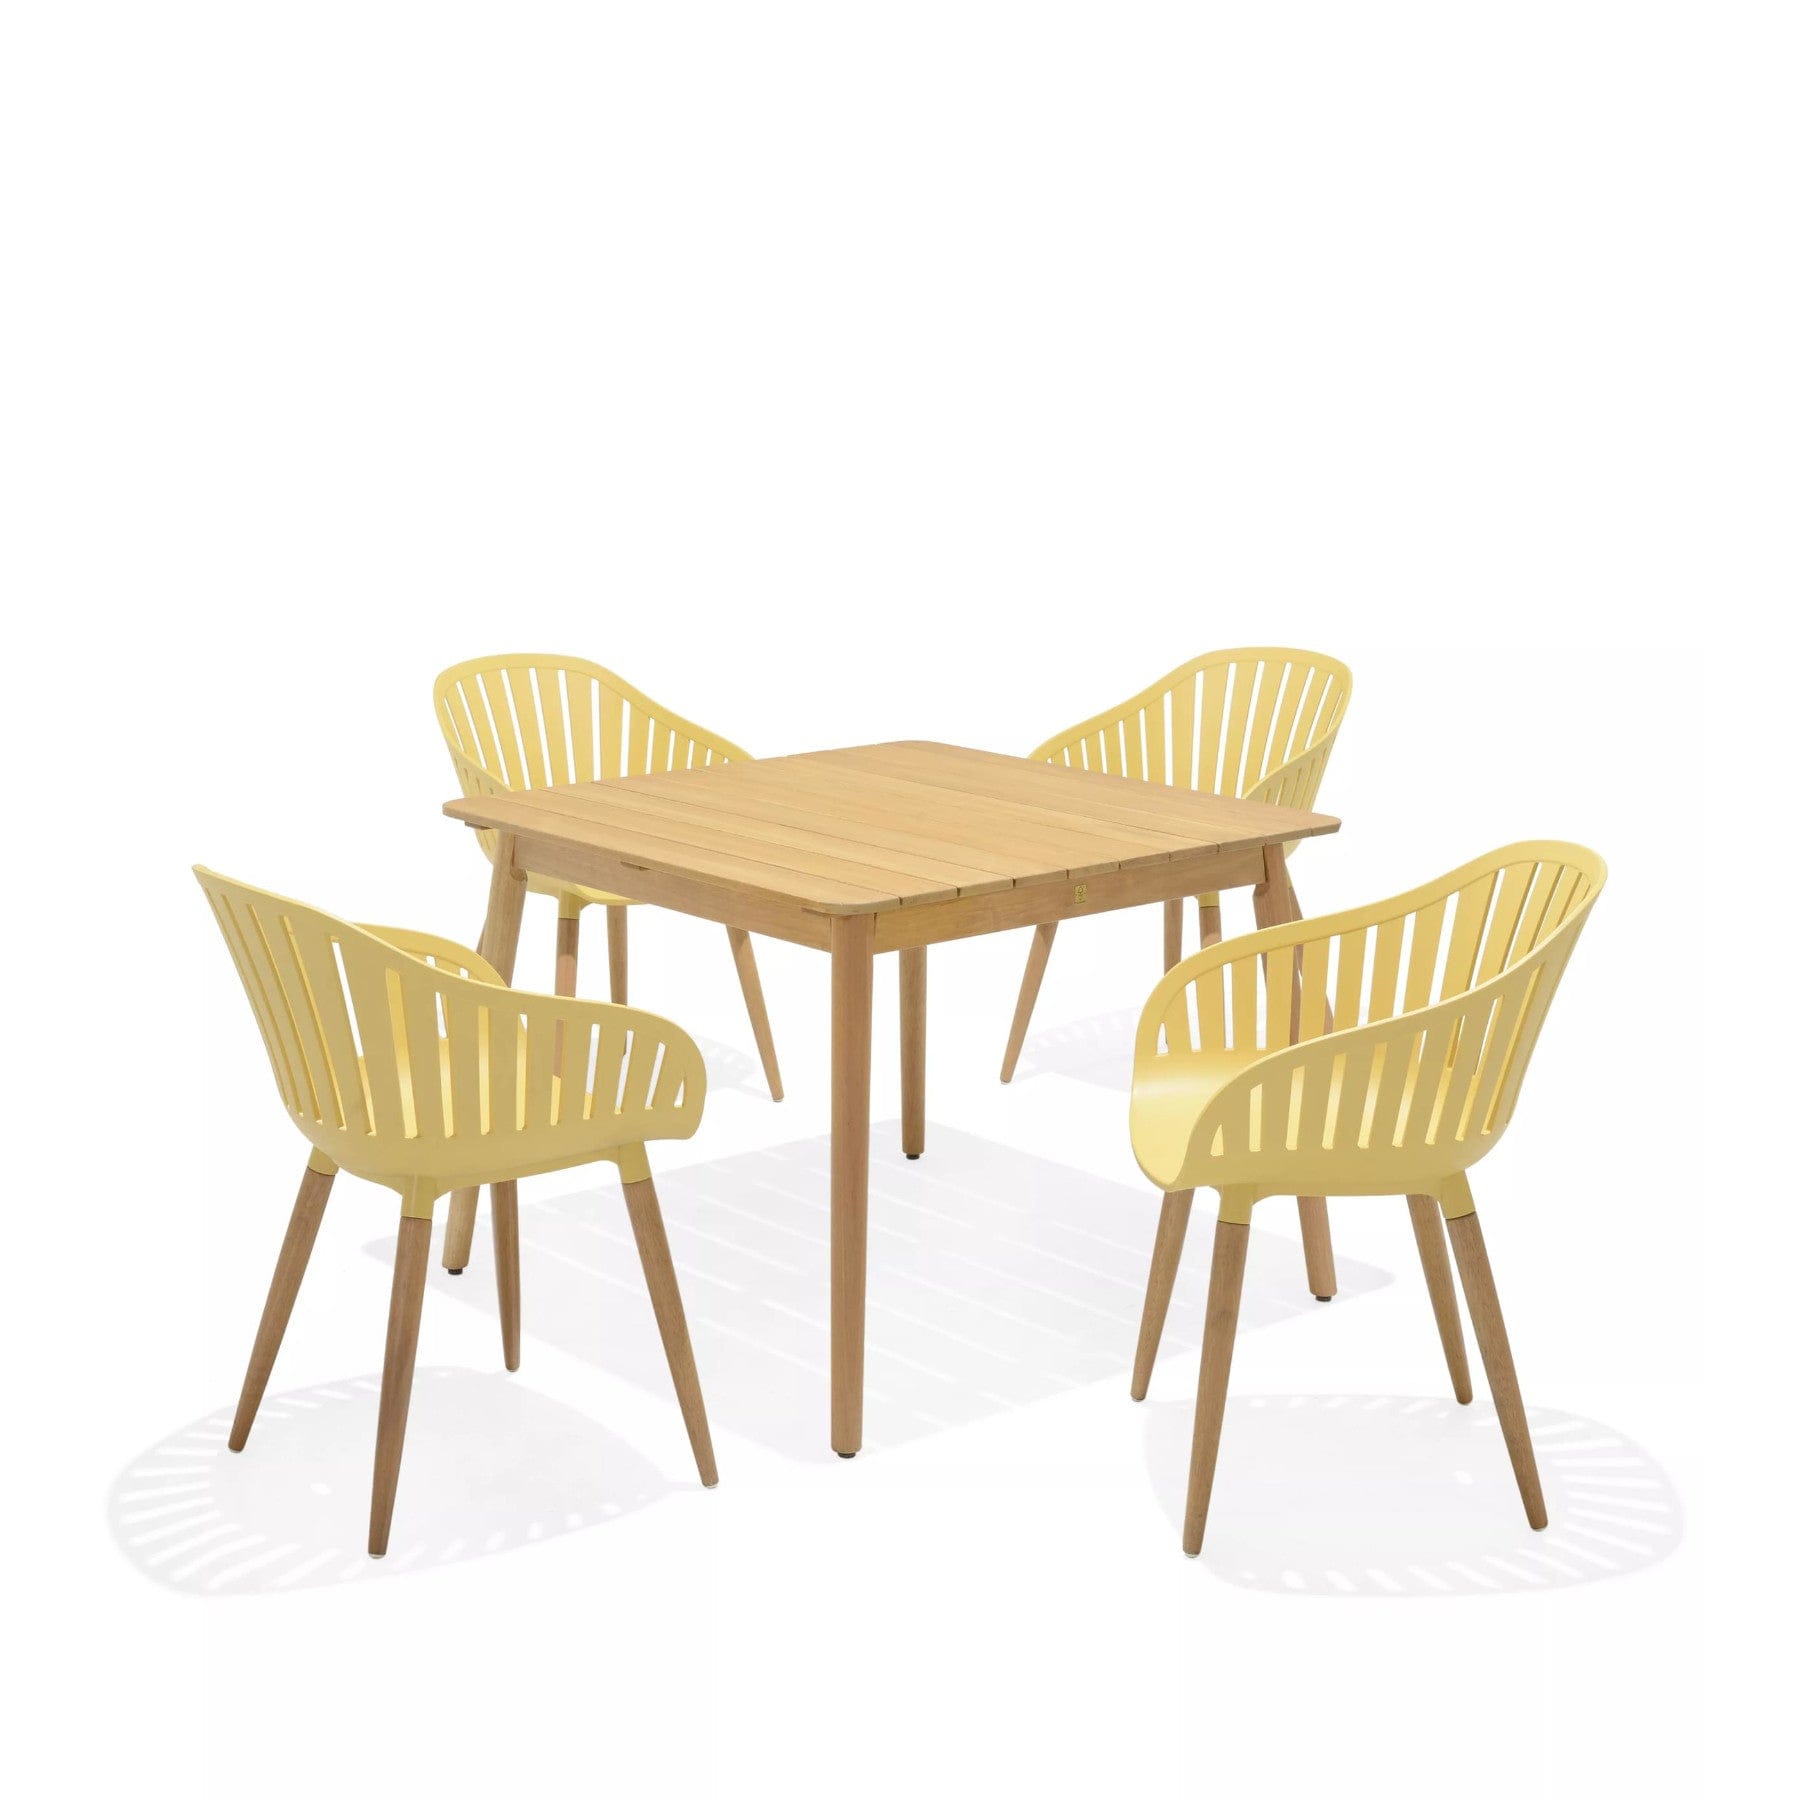 Modern wooden dining table with matching chairs set on a light background